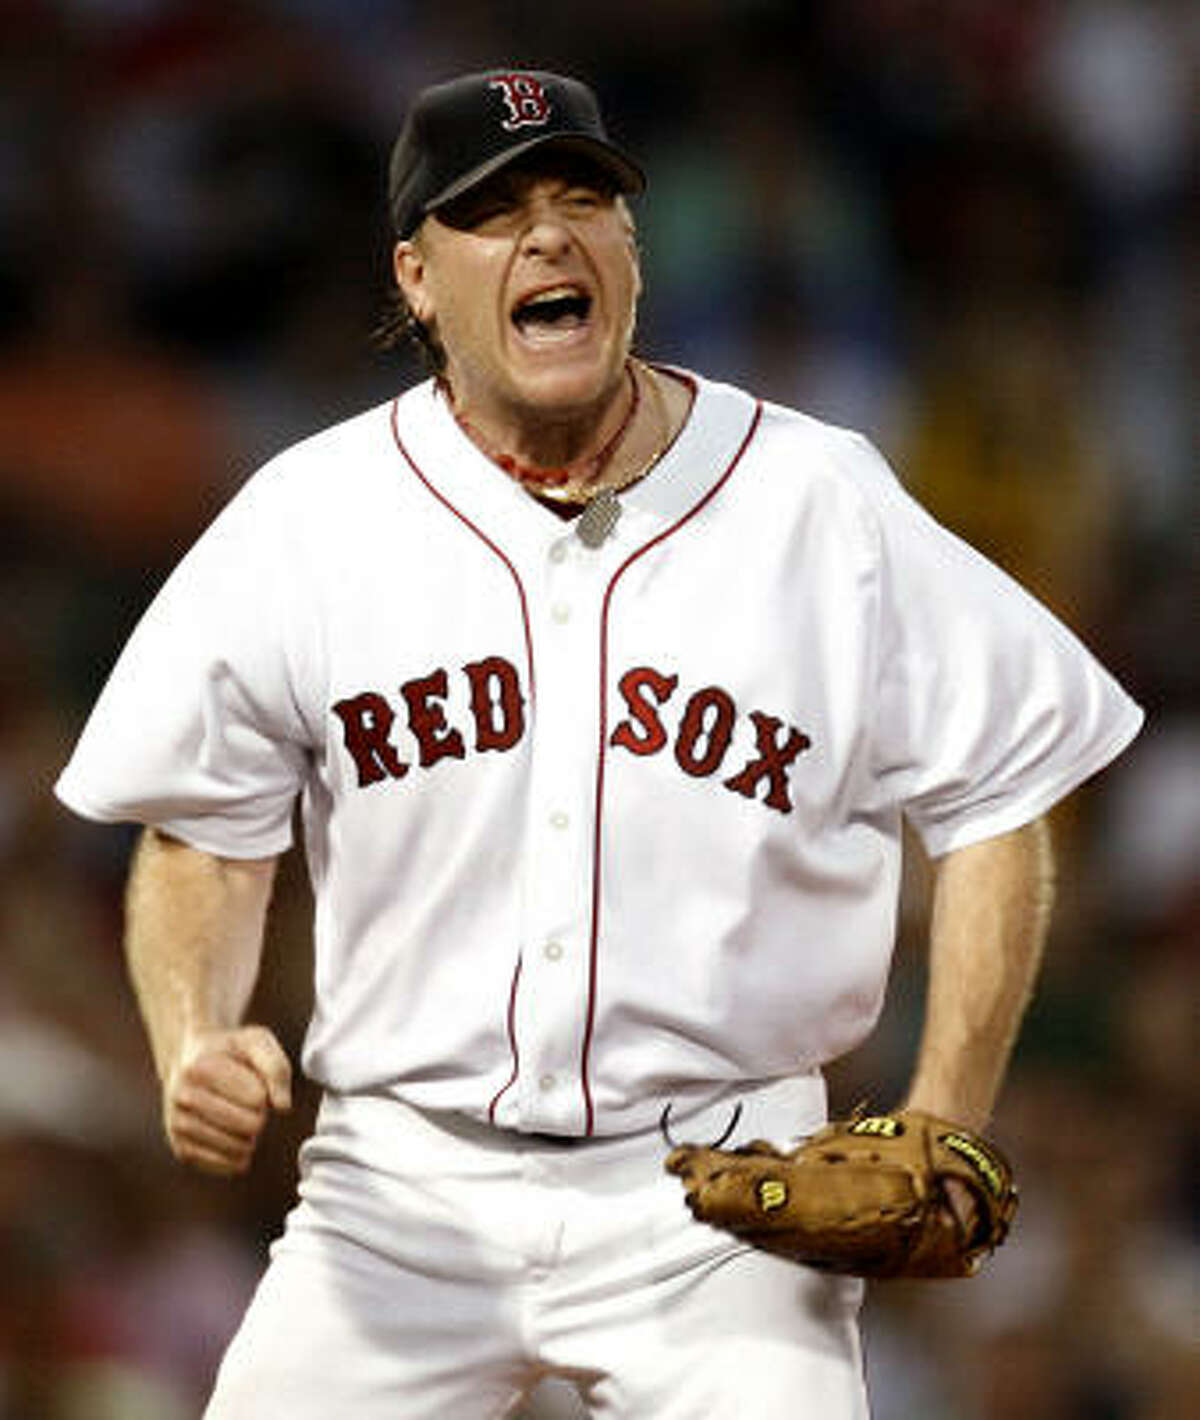 The Boston Red Sox's Curt Schilling, a former Astros hurler, has been in the major leagues for 19 years.